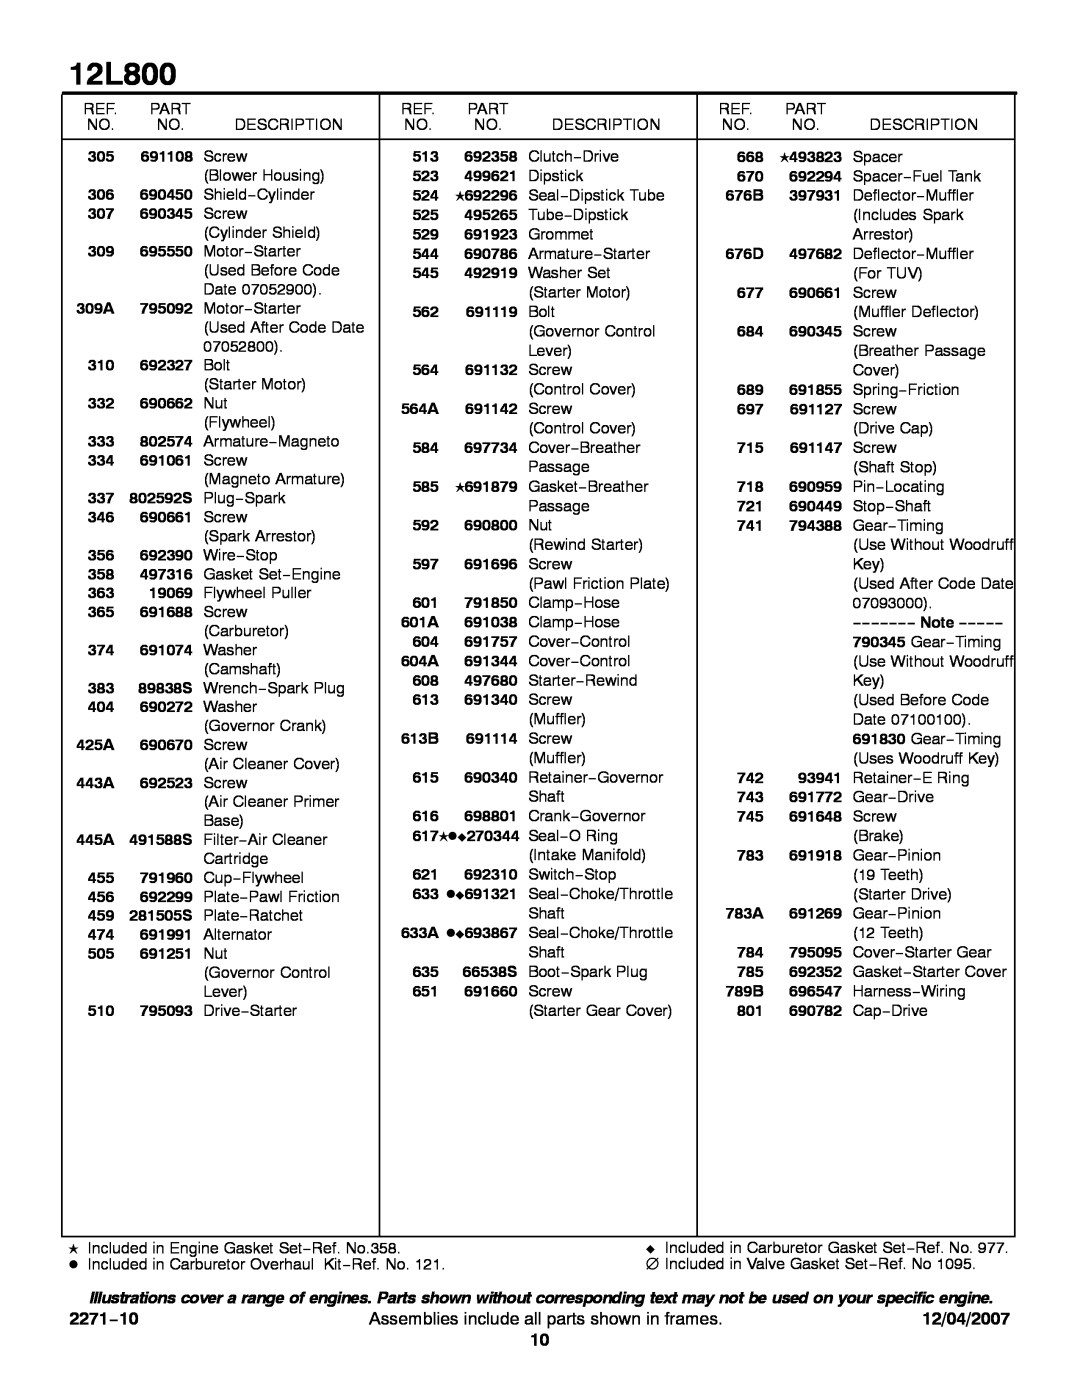 Briggs & Stratton 12L800 service manual 2271−10, Assemblies include all parts shown in frames, 12/04/2007 